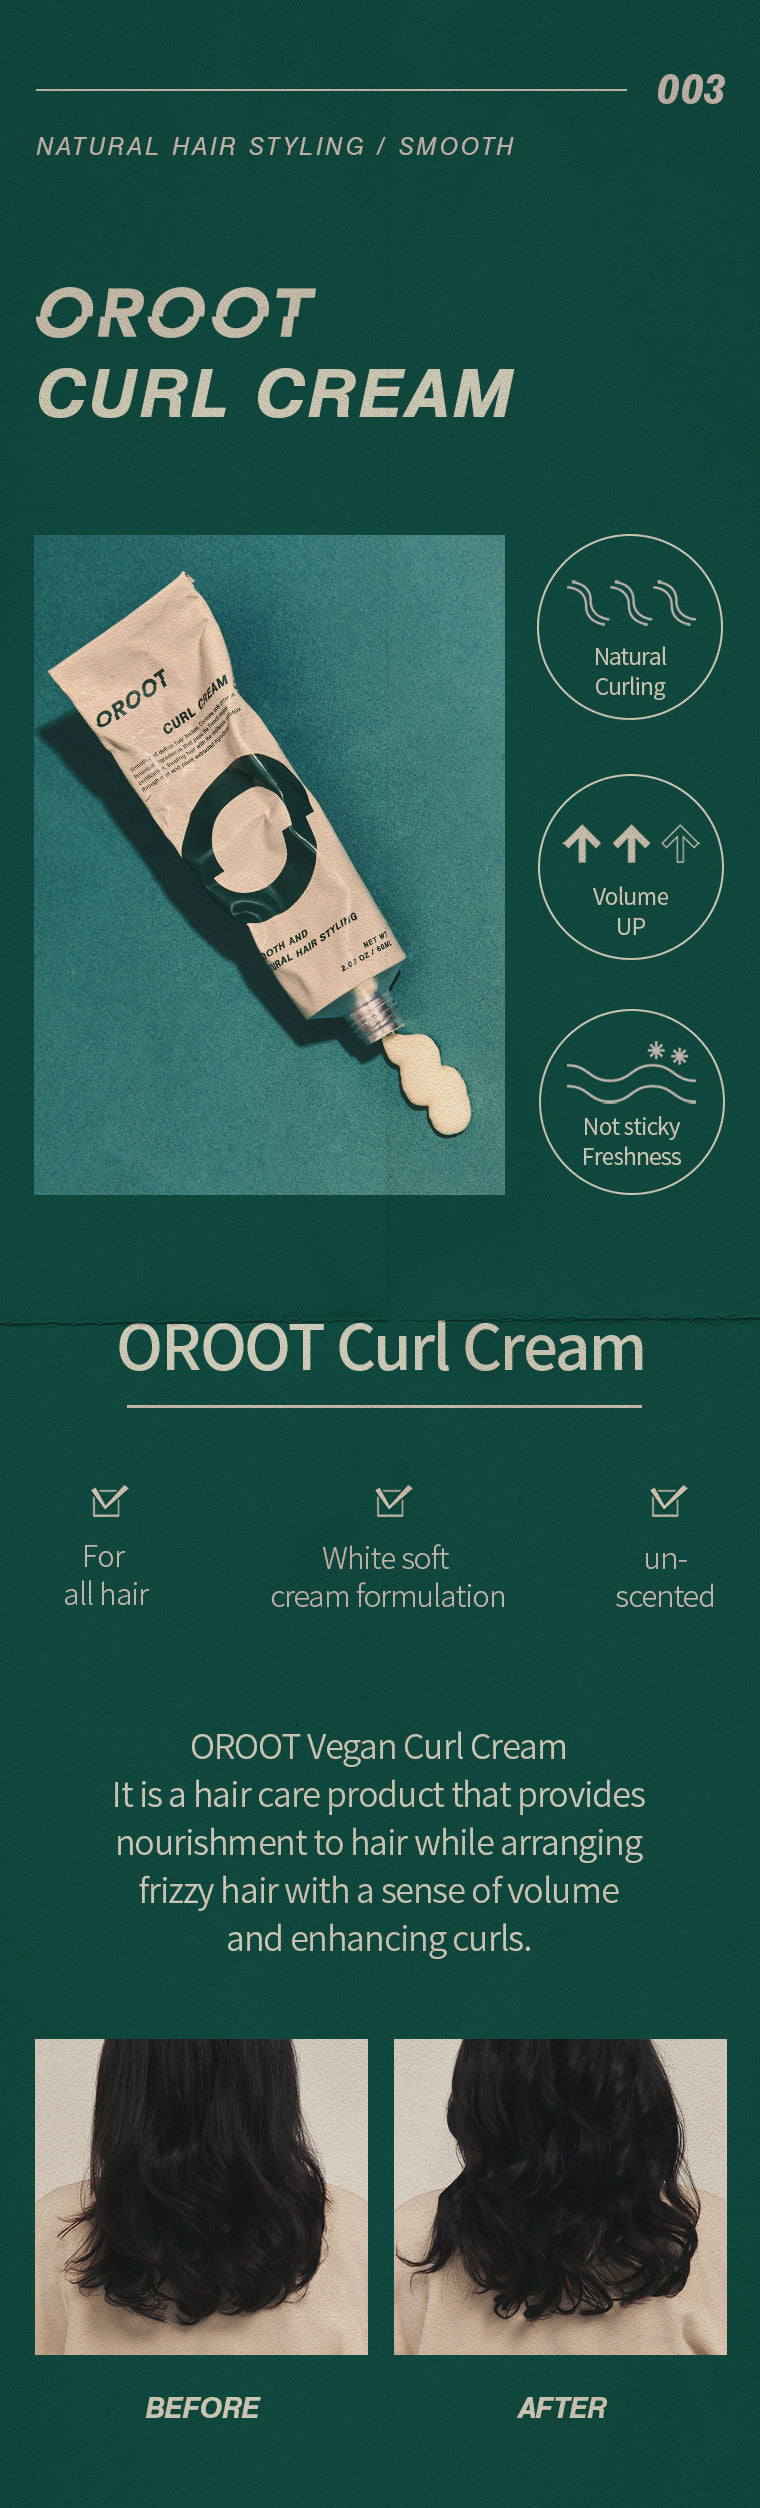 the effect of OROOT Vegan Curl Cream after using